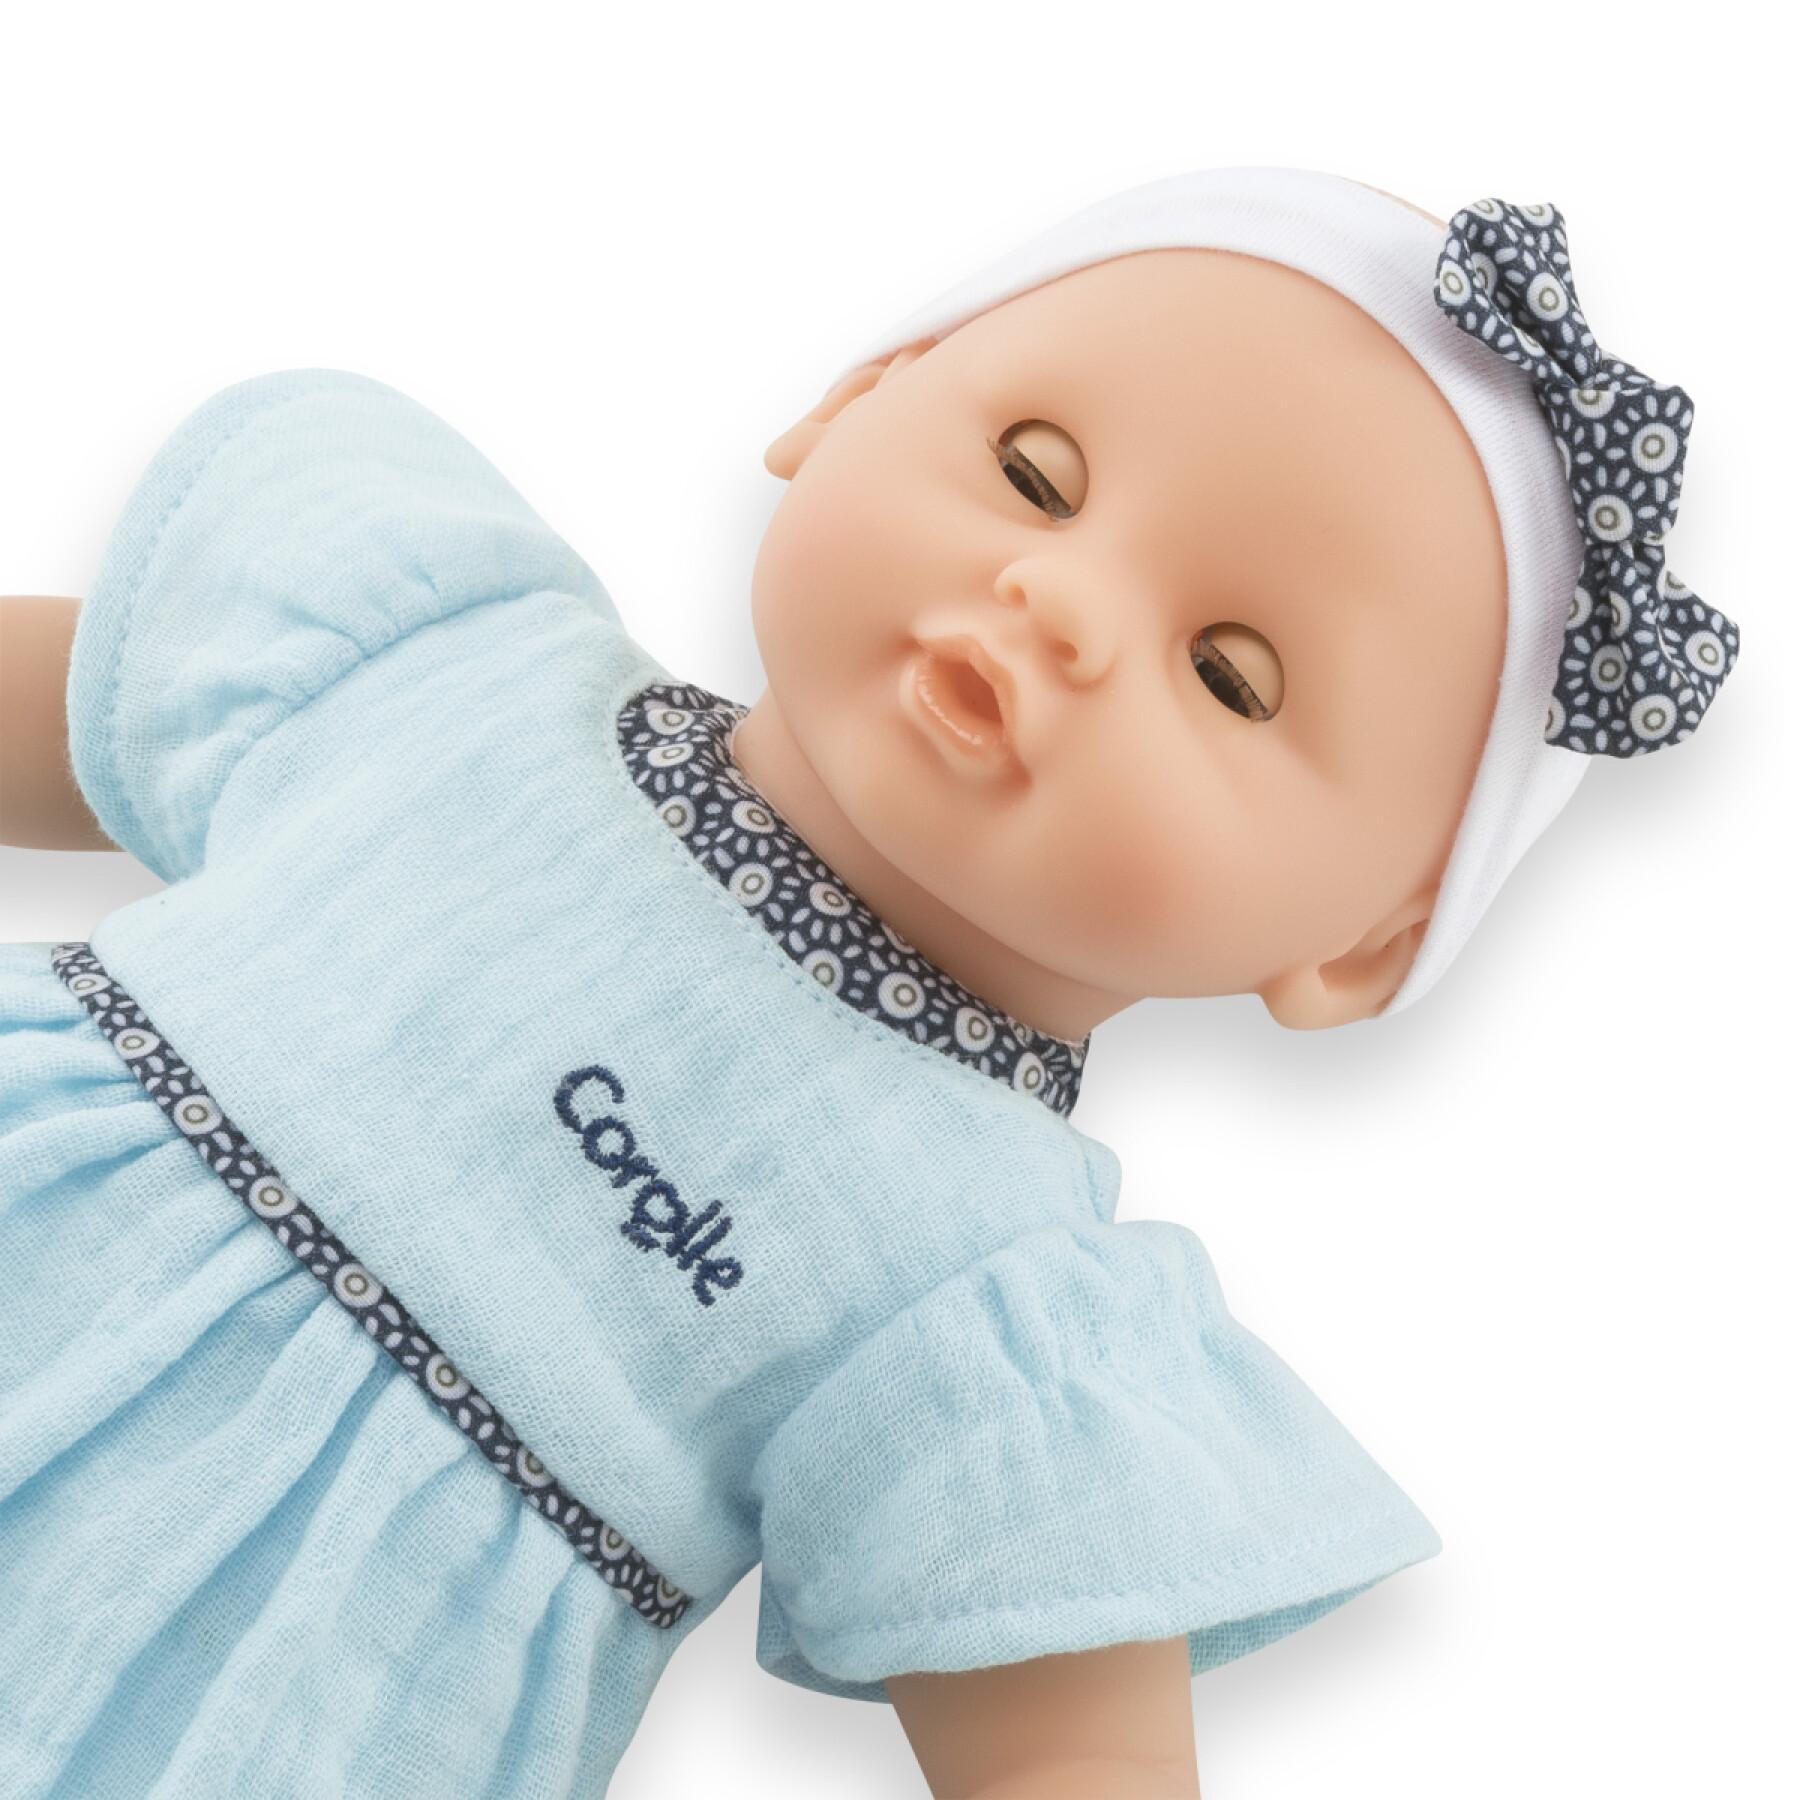 Cuddly baby doll maud Corolle